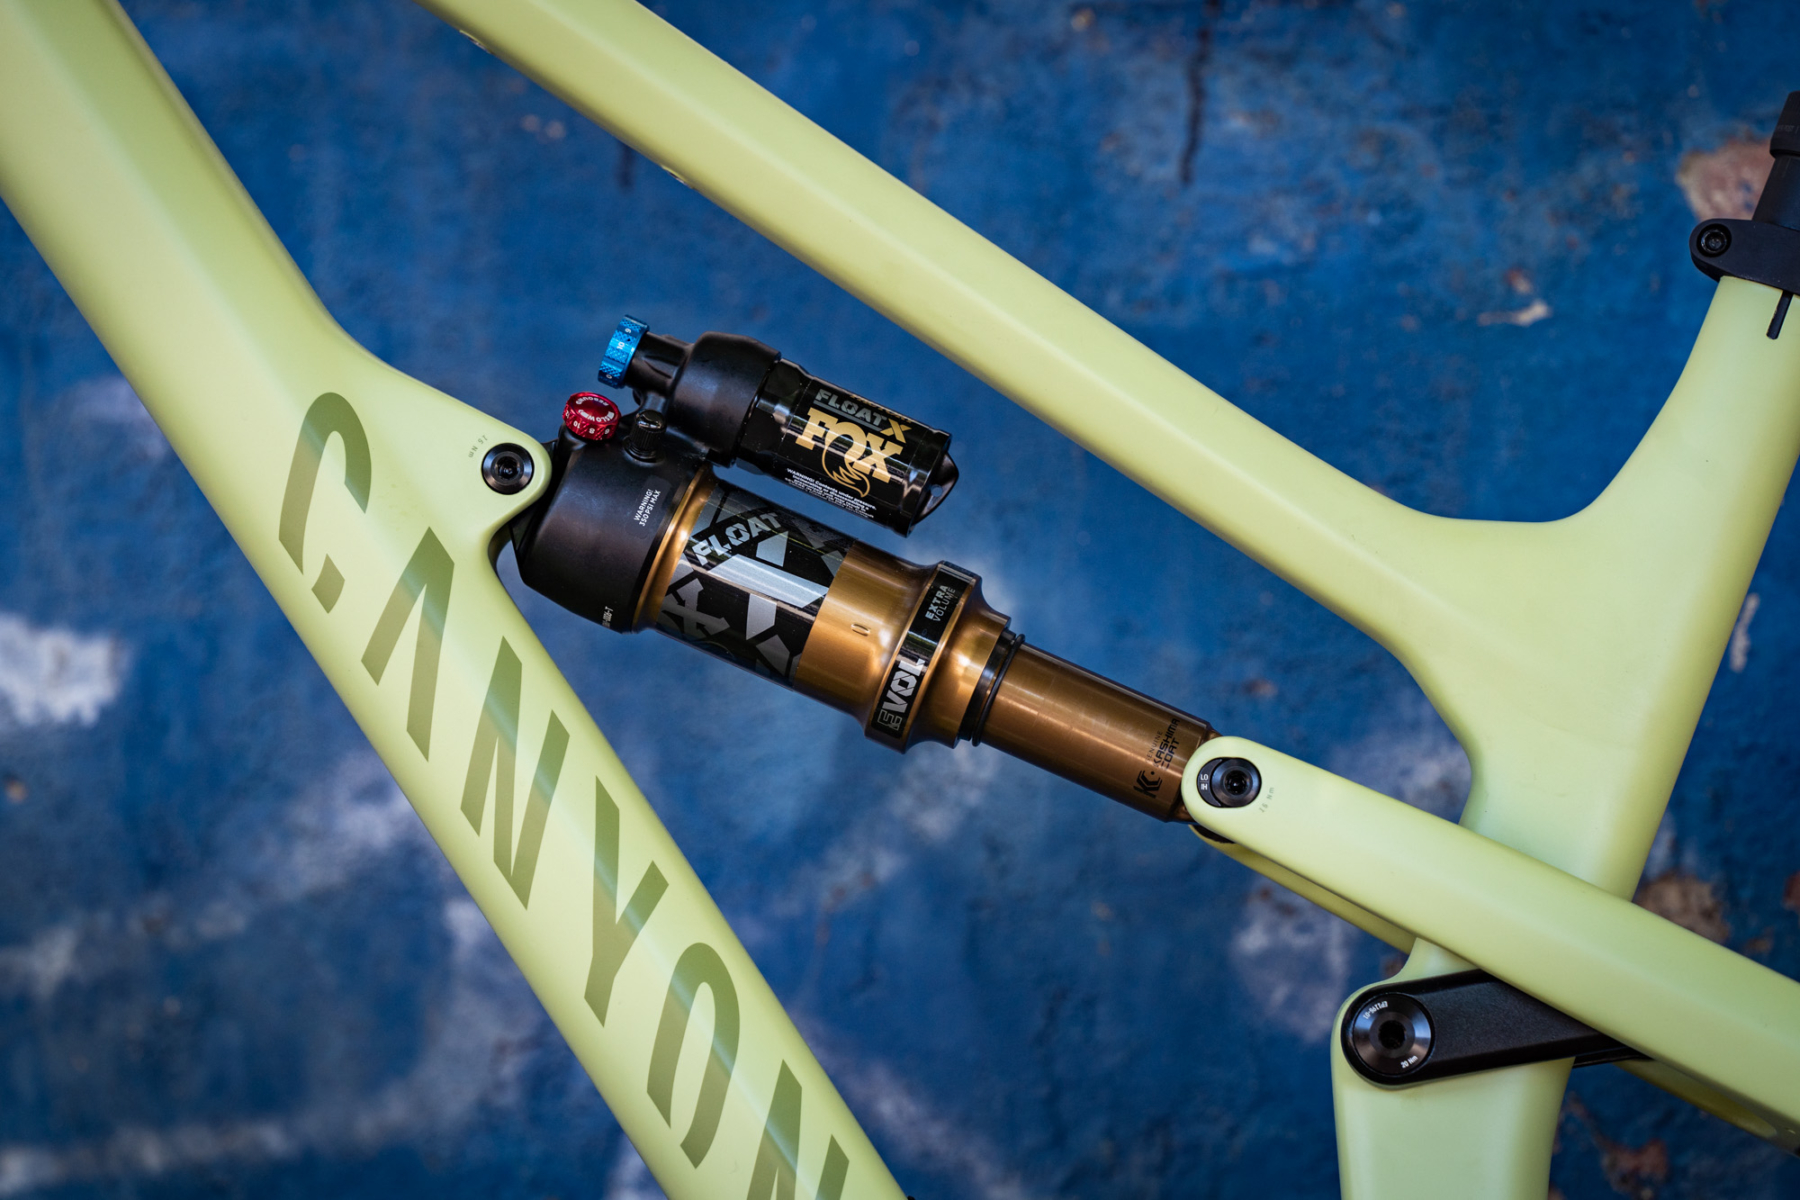 Ultimate Guide to Shock Pumps: Top Tips & Must-Knows for MTB Enthusiasts